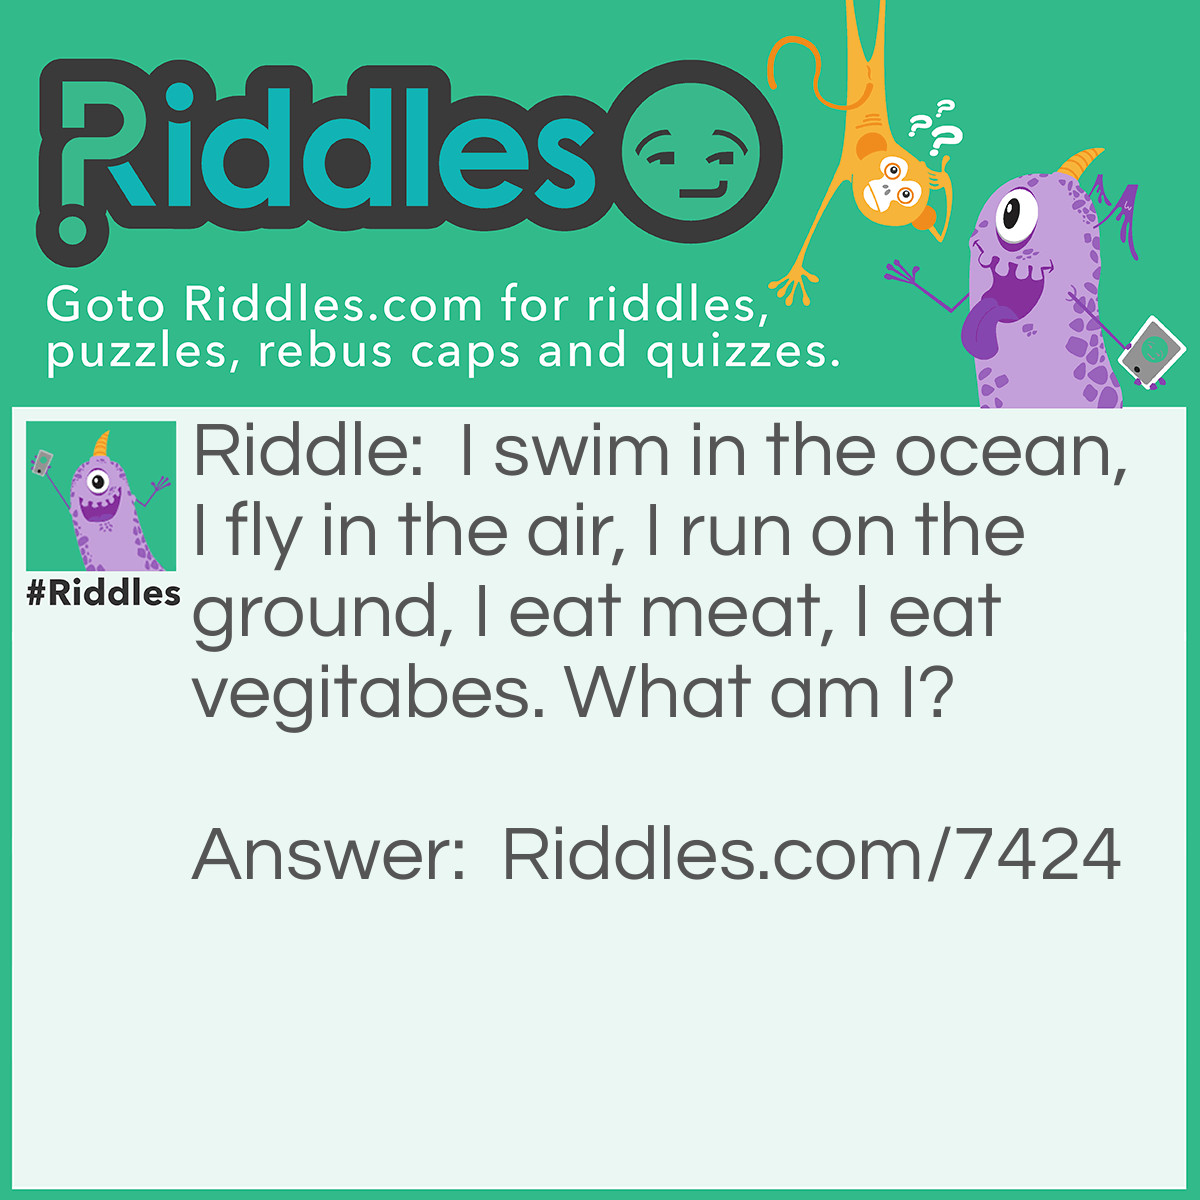 Riddle: I swim in the ocean, I fly in the air, I run on the ground, I eat meat, I eat vegitabes. What am I? Answer: A mammal (whale, bat, cat, wolf, rabbit)